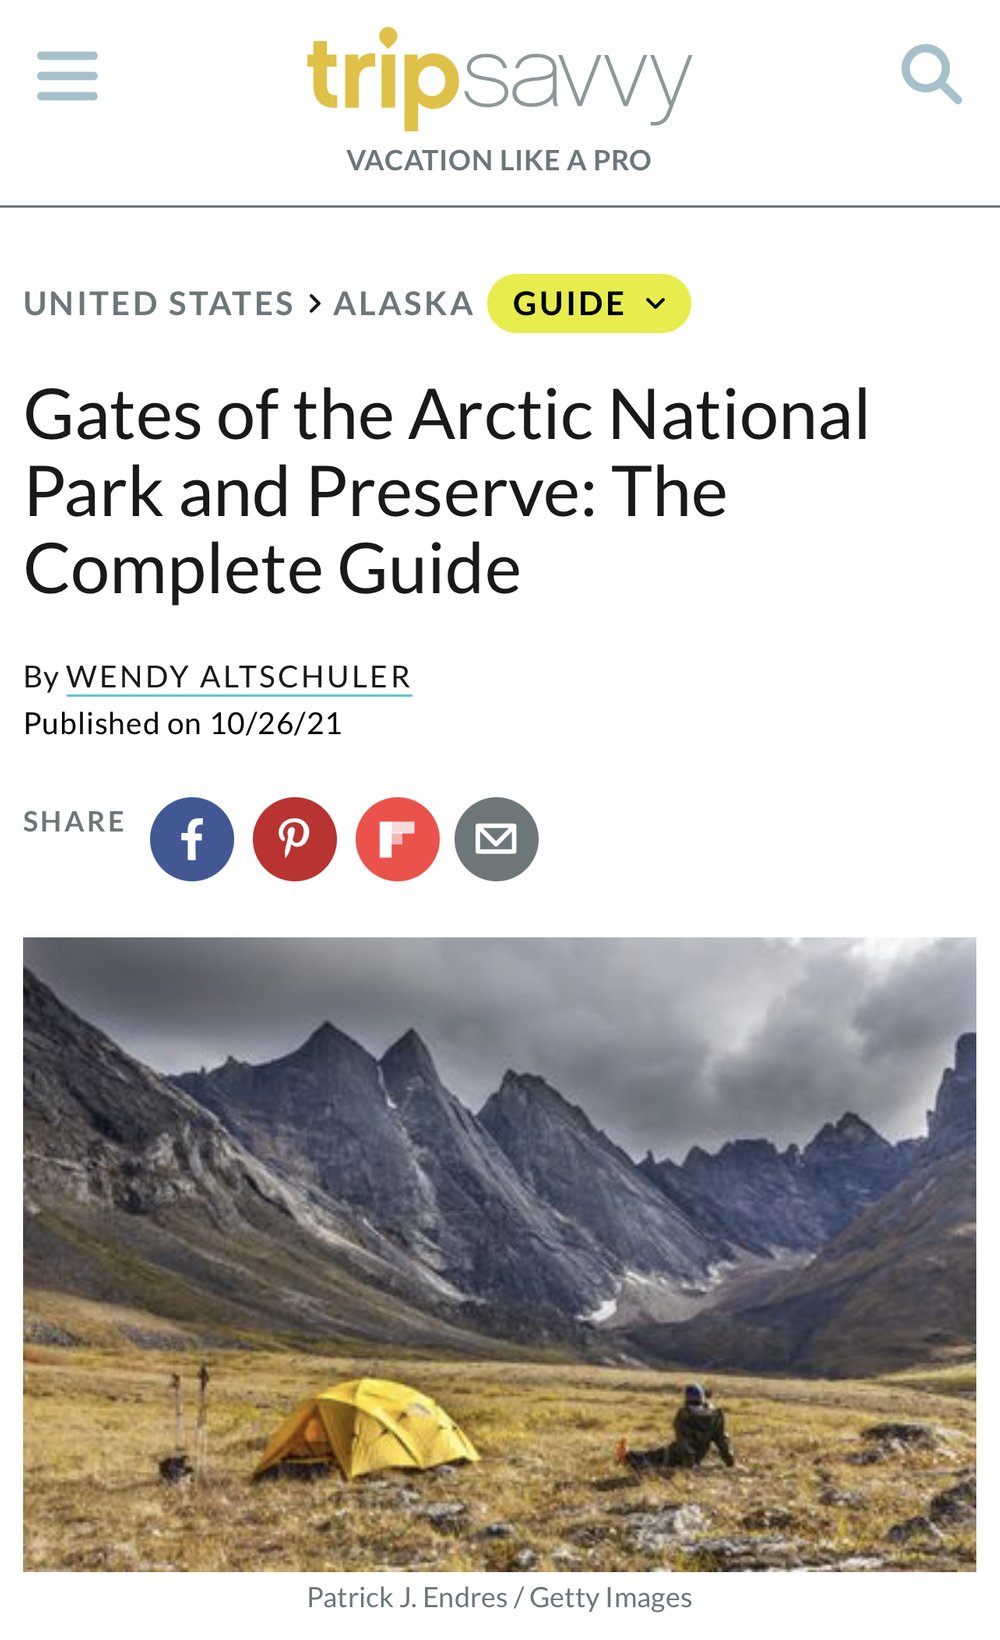 Gates of the Arctic National Park and Preserve: The Complete Guide